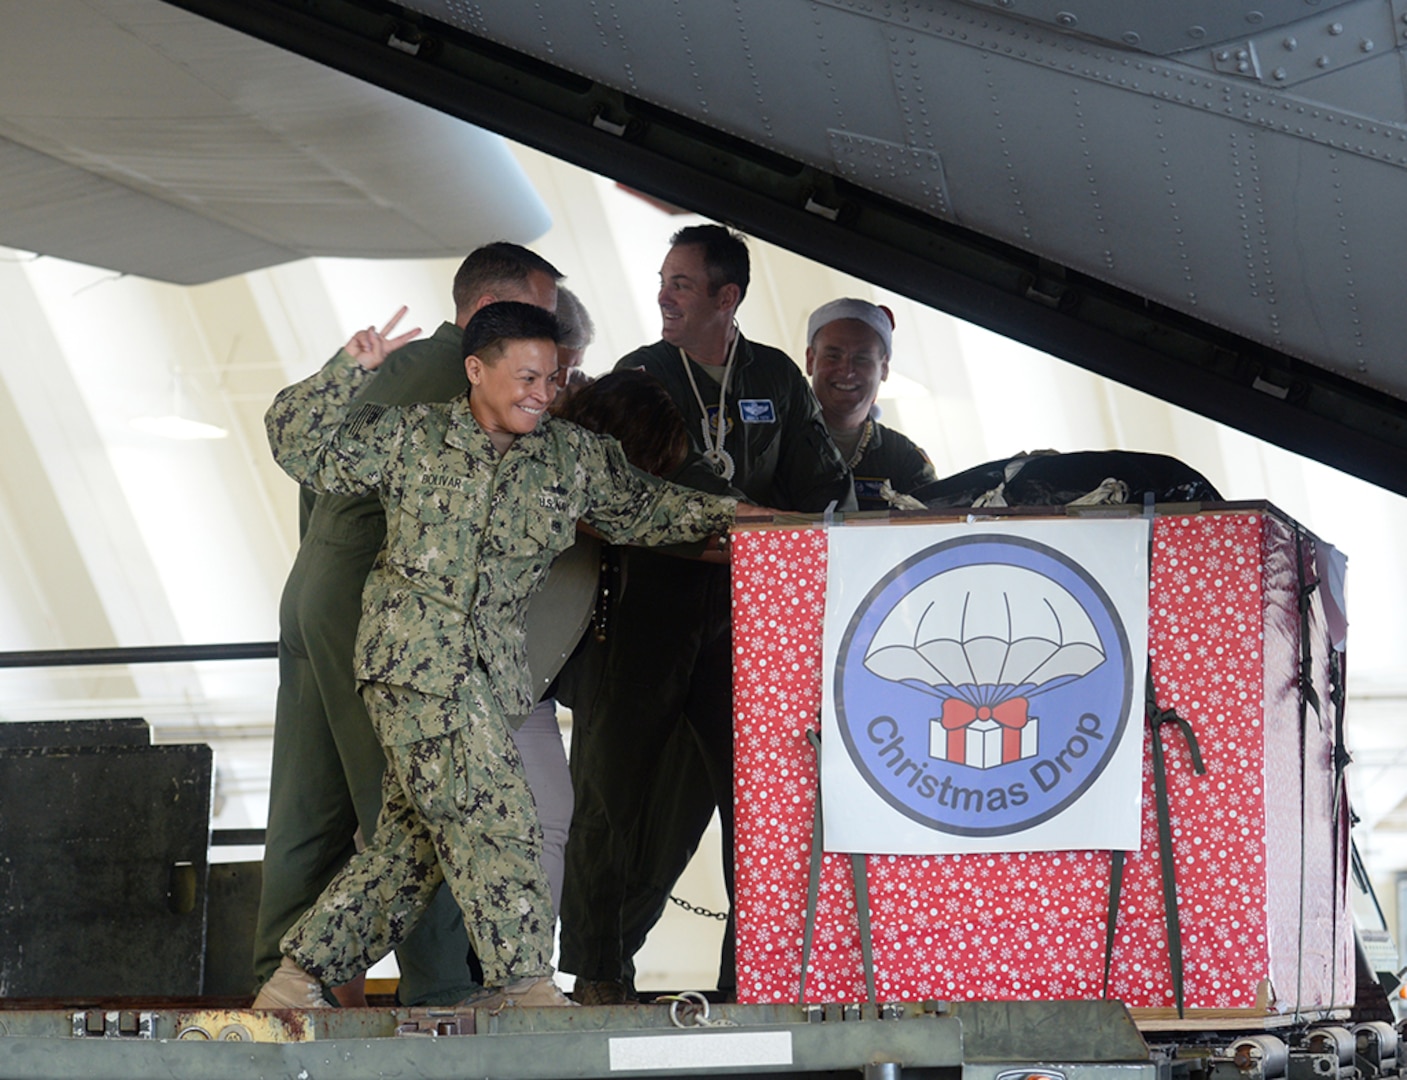 Rear Adm. Babette Bolivar, Joint Region Marianas commander, counts down before pushing a crate containing donated goods into a C-130 Hercules during the Christmas Drop Push Ceremony Dec. 8, 2015, at Andersen Air Force Base, Guam. Operation Christmas Drop, which has been conducted for 64 years, will receive support from the Japanese Air Self Defense Force and the Royal Australian Air Force for the first time. 